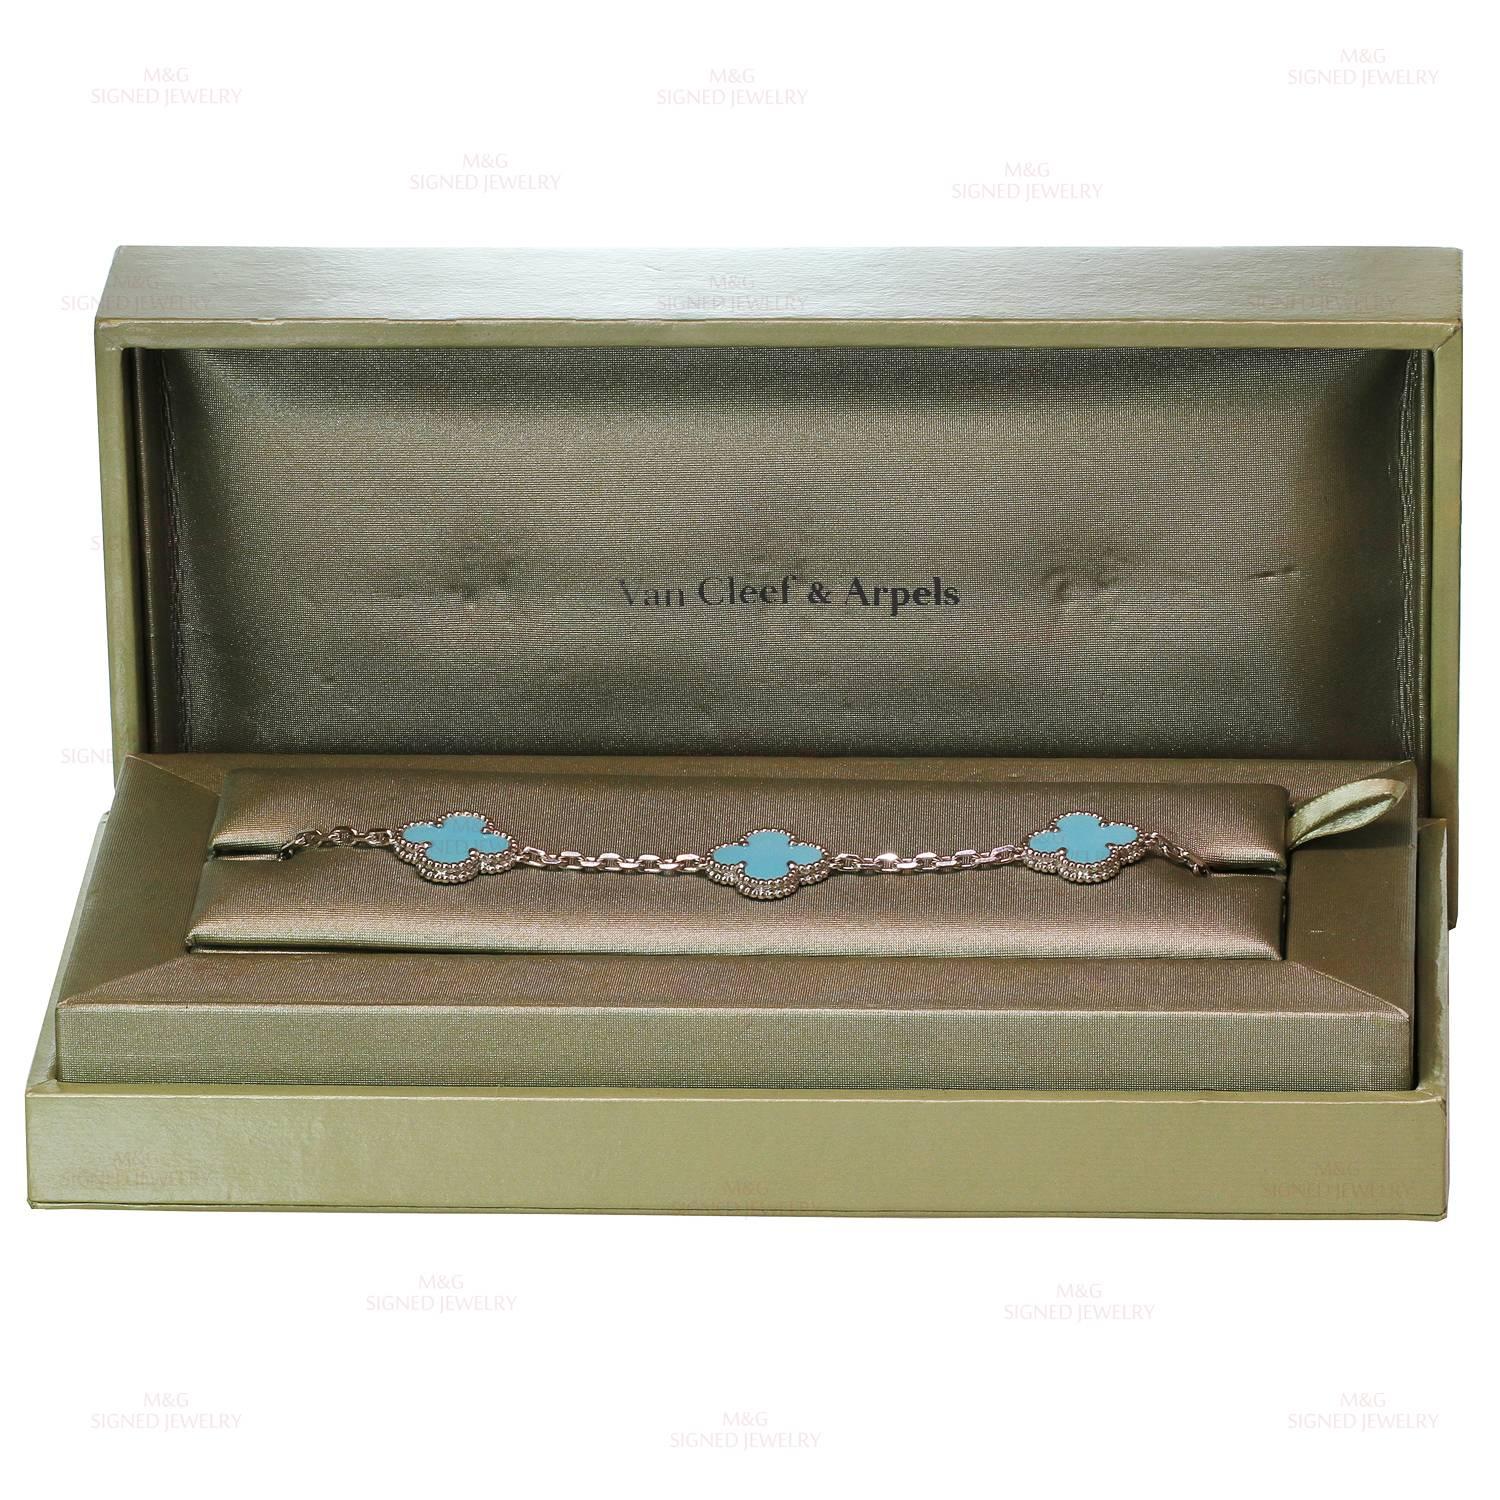 This vibrant Van Cleef & Arpels bracelet is crafted in 18k white gold and features 5 lucky clover motifs beautifully inlaid with natural blue turquoise in round bead settings. Made in France circa 2010s. Measurements: 0.59